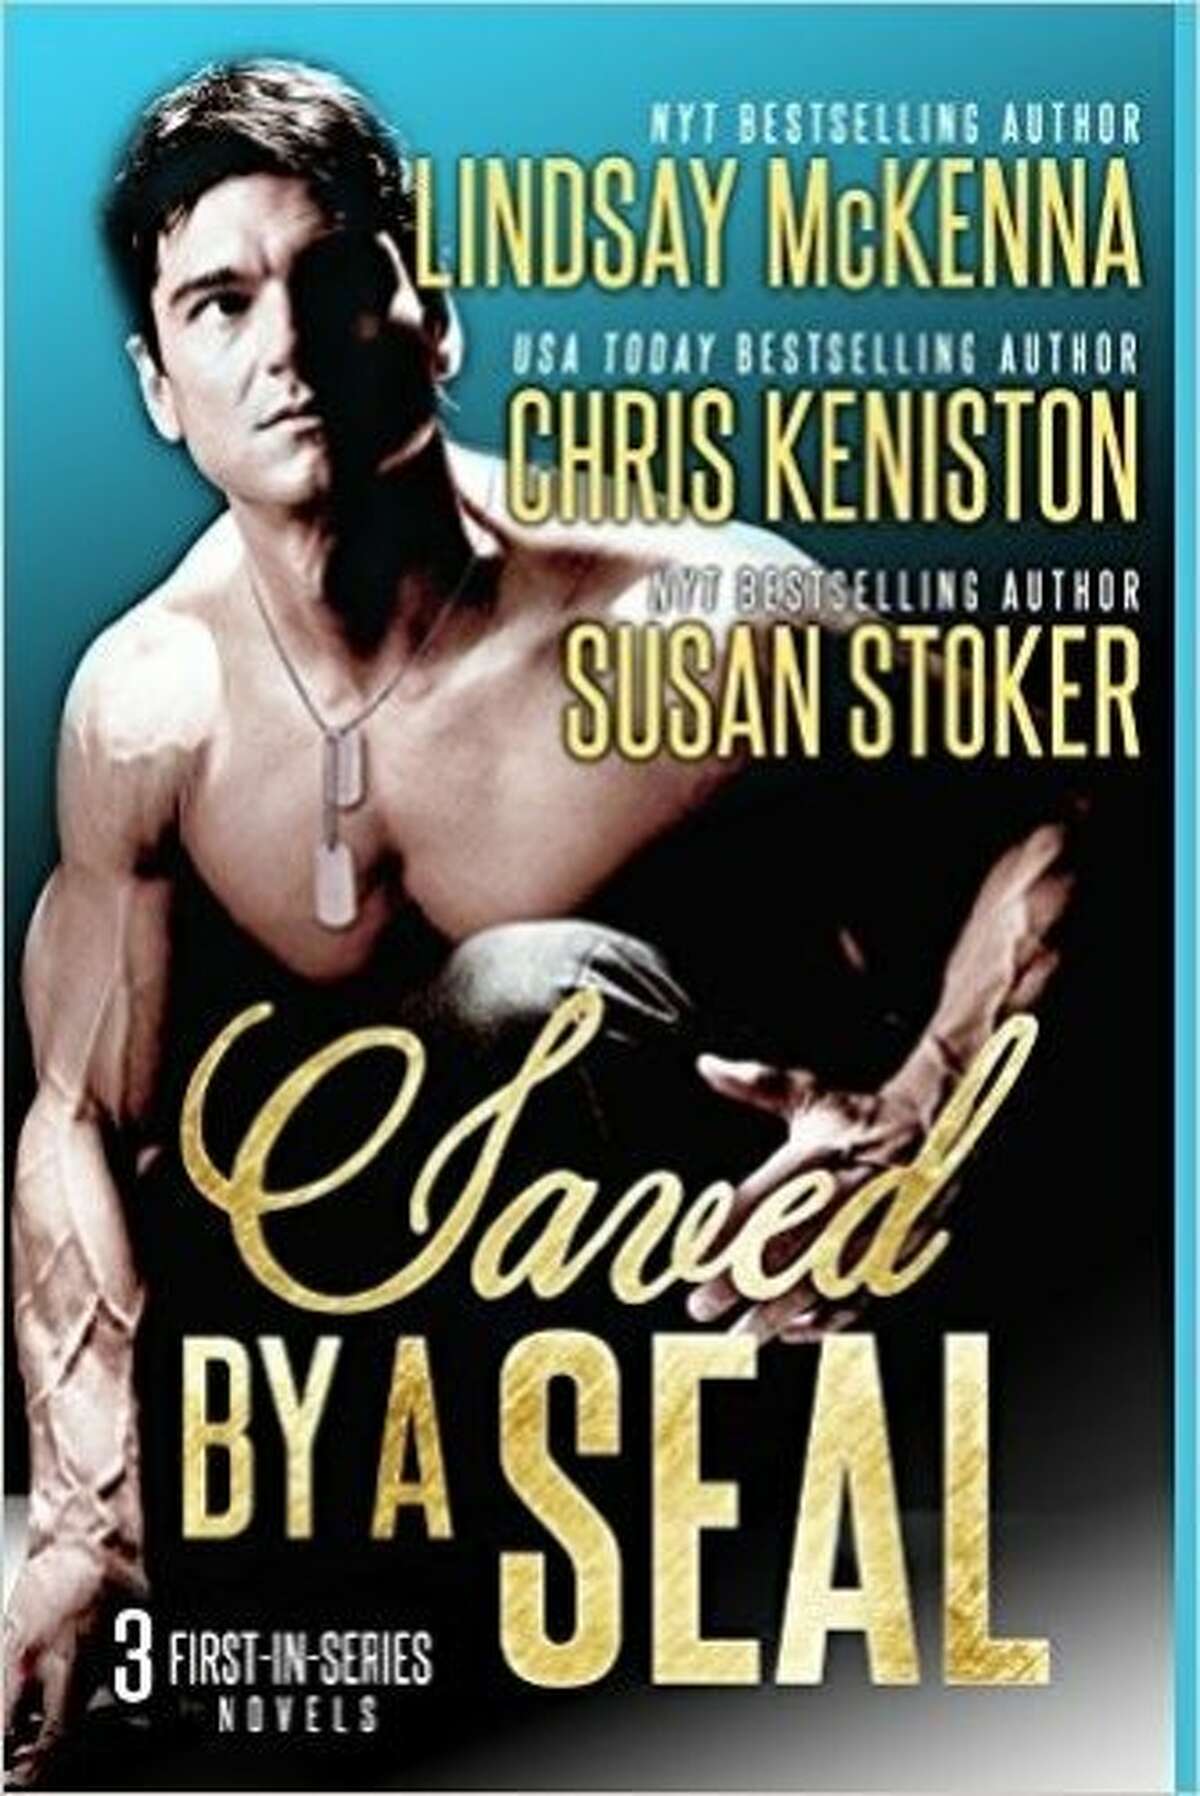 "Saved by a Seal" the 461st romance novel cover featuring model Jason Aaron Baca, who now has beaten Fabio's records for most romance novel cover appearances.